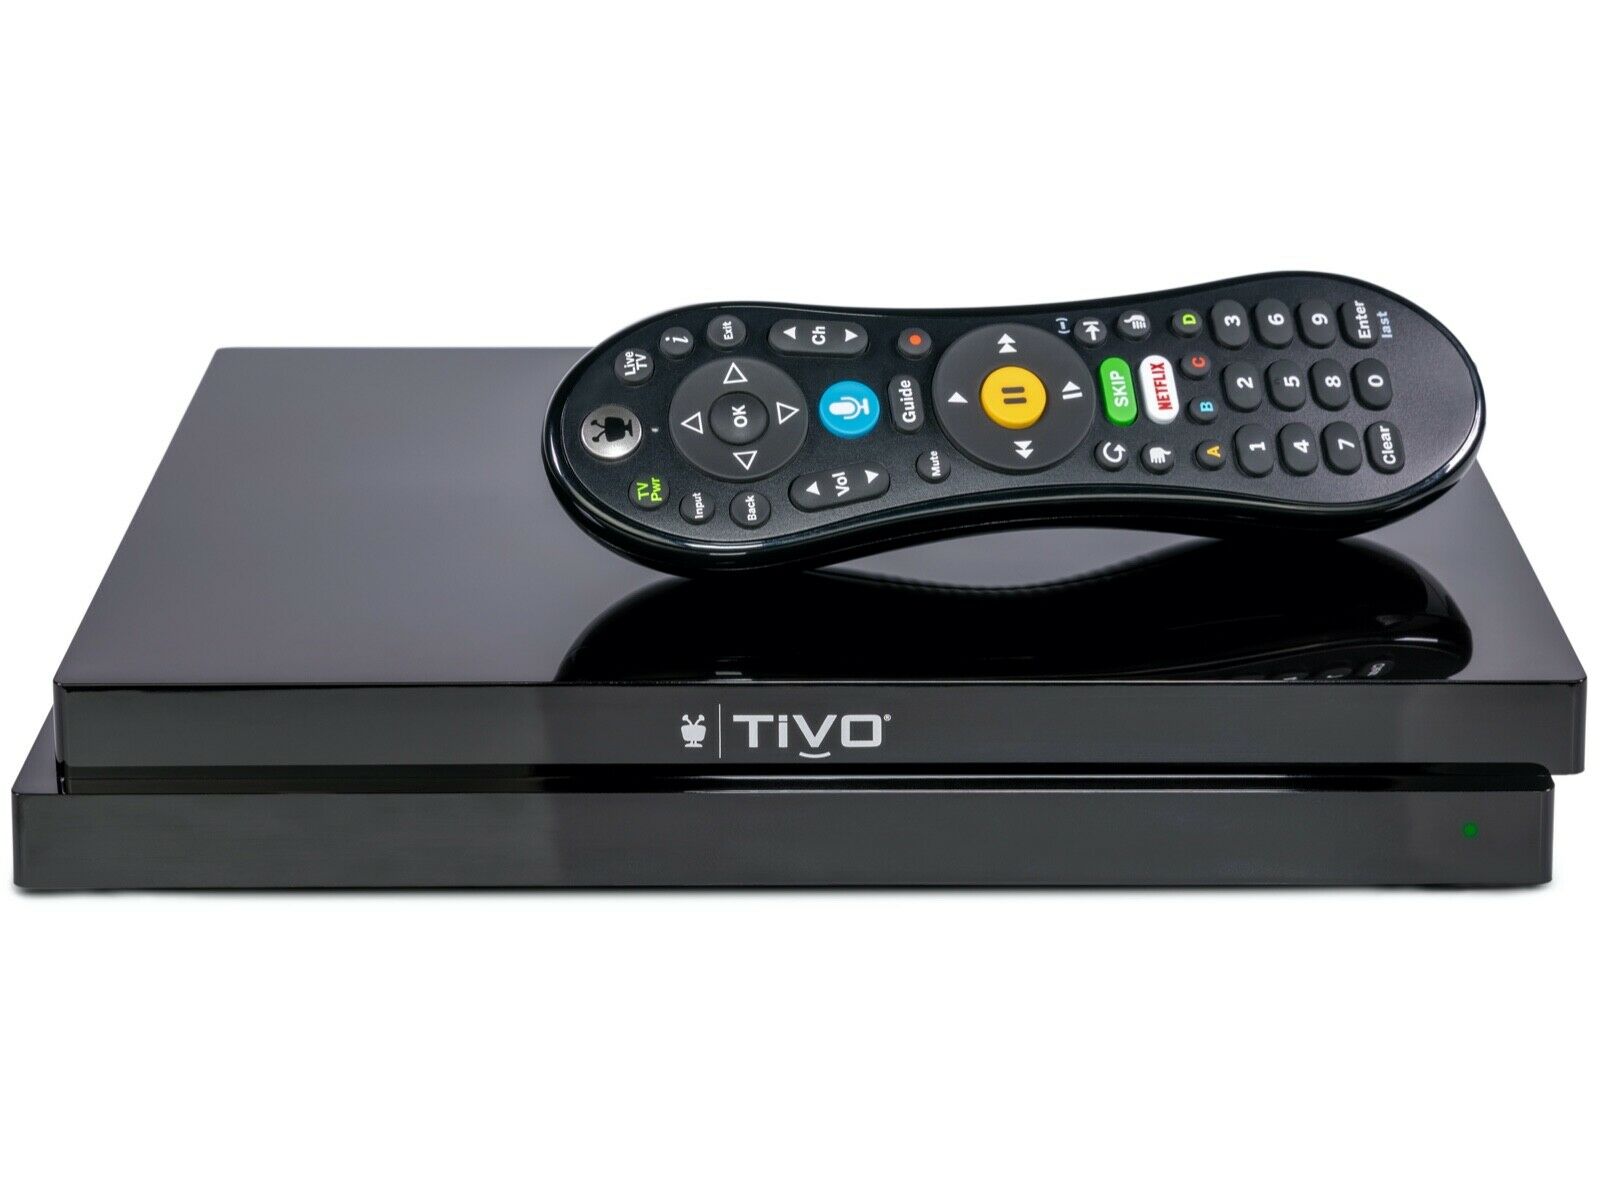 Tivo Edge Dvr Streaming Media Player For Antenna 2 Tuners 500gb Storage Rd6f50 R